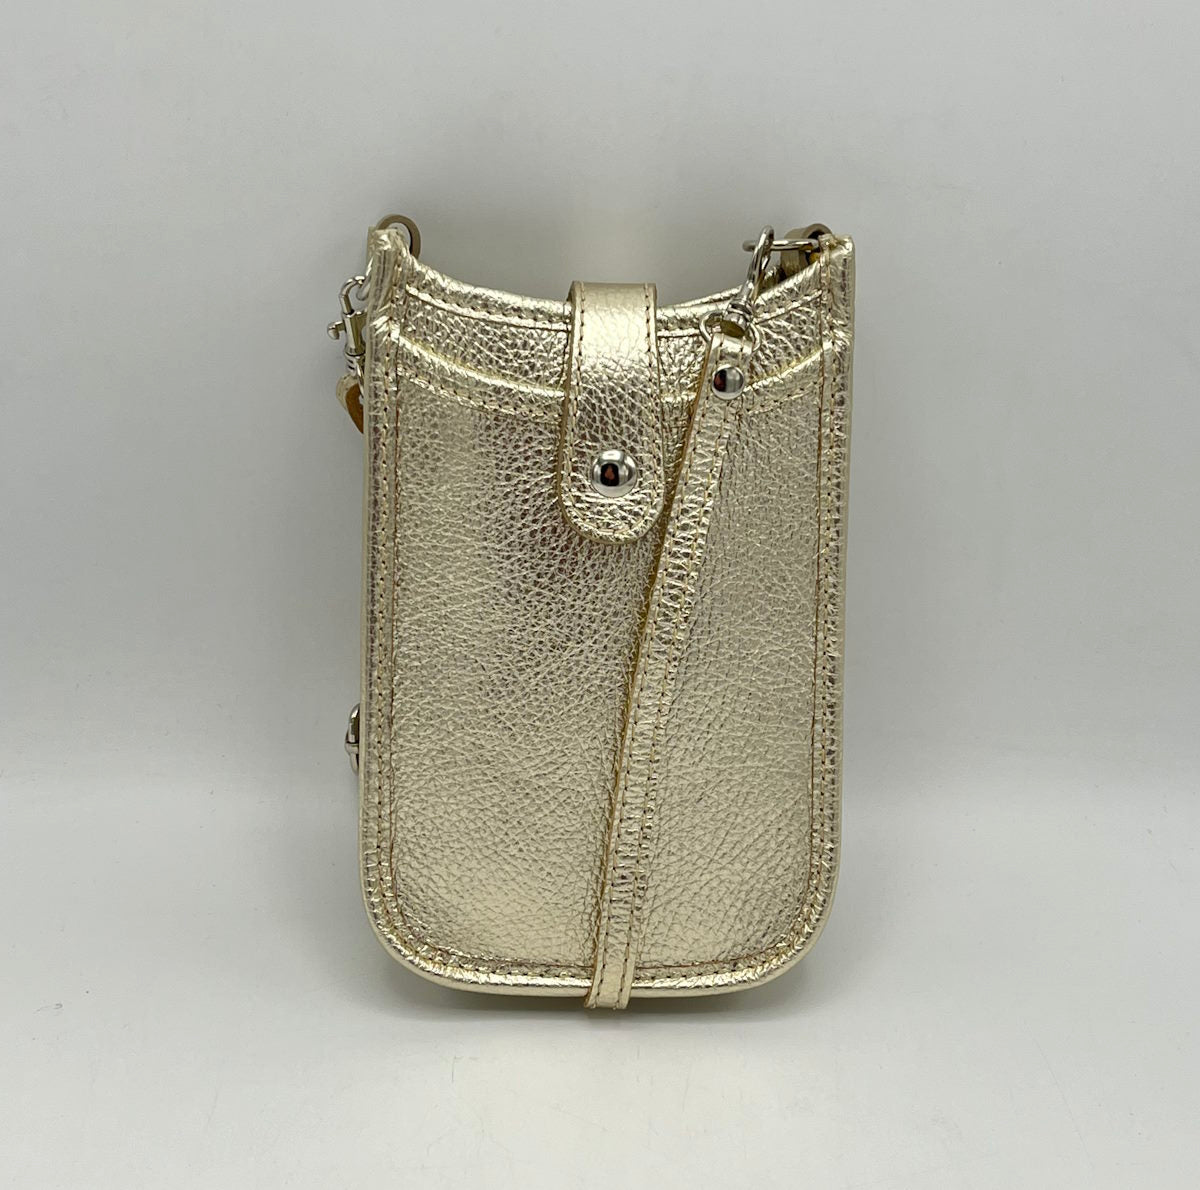 Genuine leather mini shoulder bag, Made in Italy, art. 112450